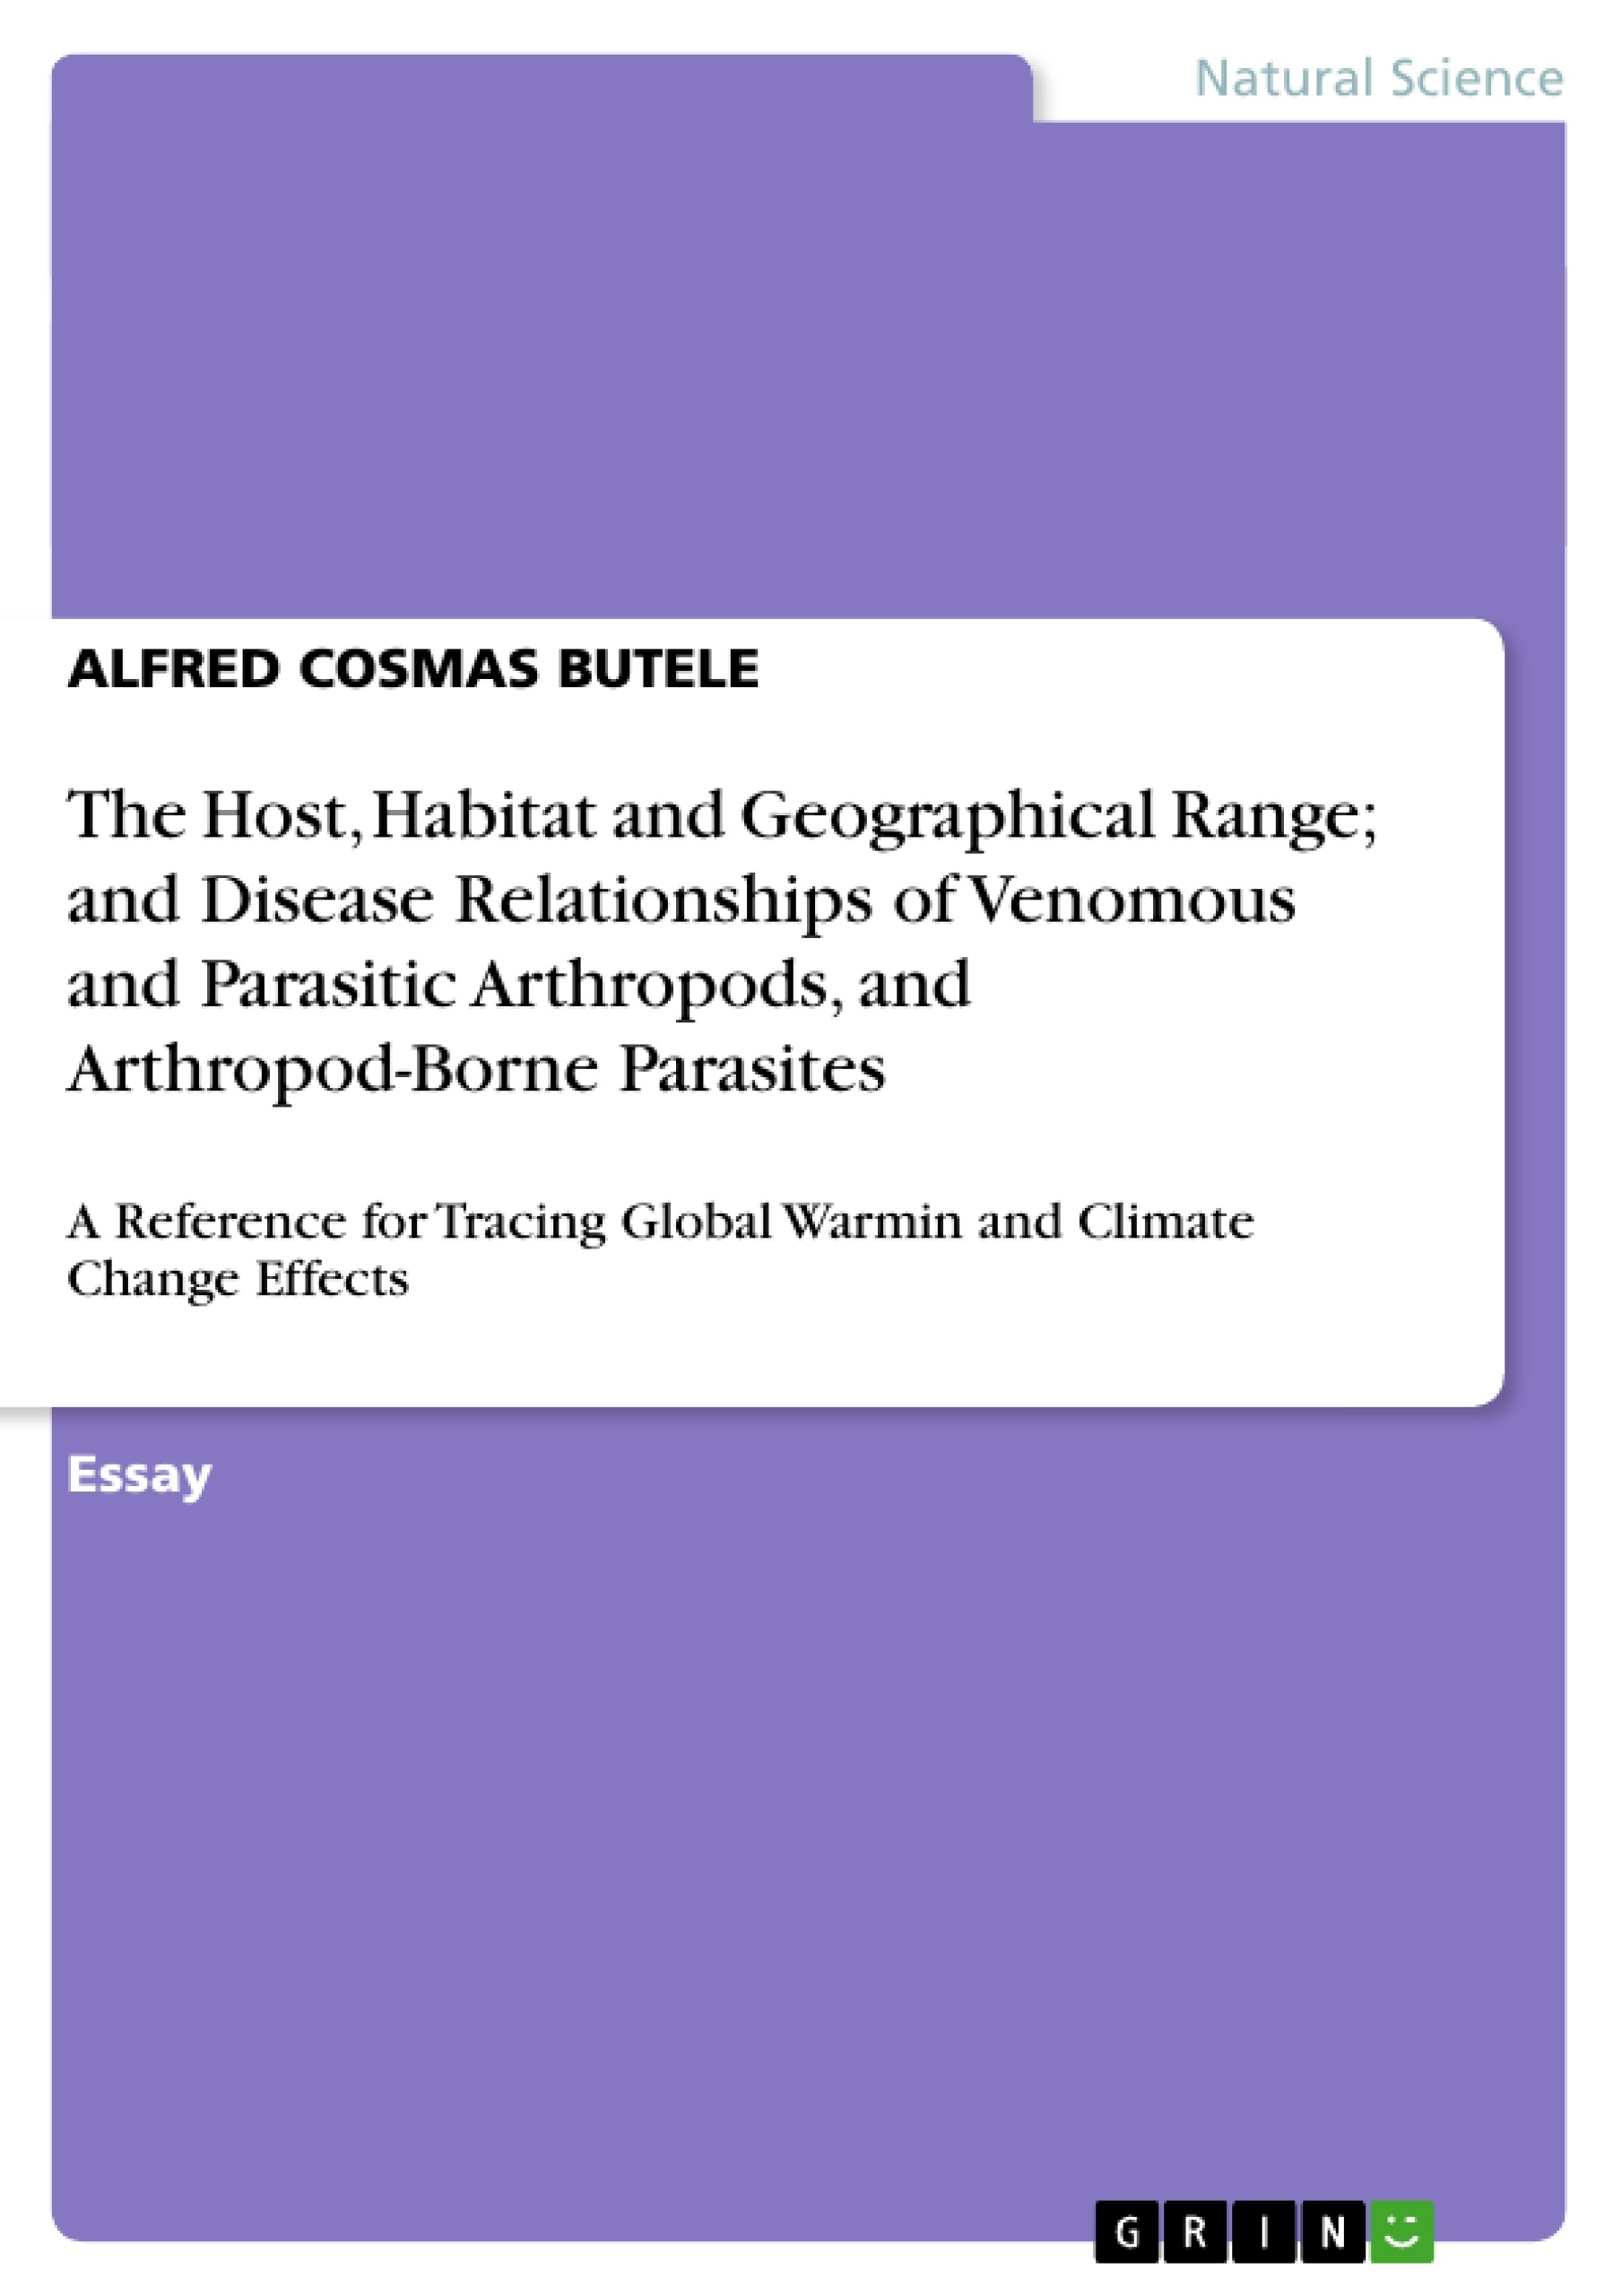 Título: The Host, Habitat and Geographical Range; and Disease Relationships of Venomous and Parasitic Arthropods, and Arthropod-Borne Parasites